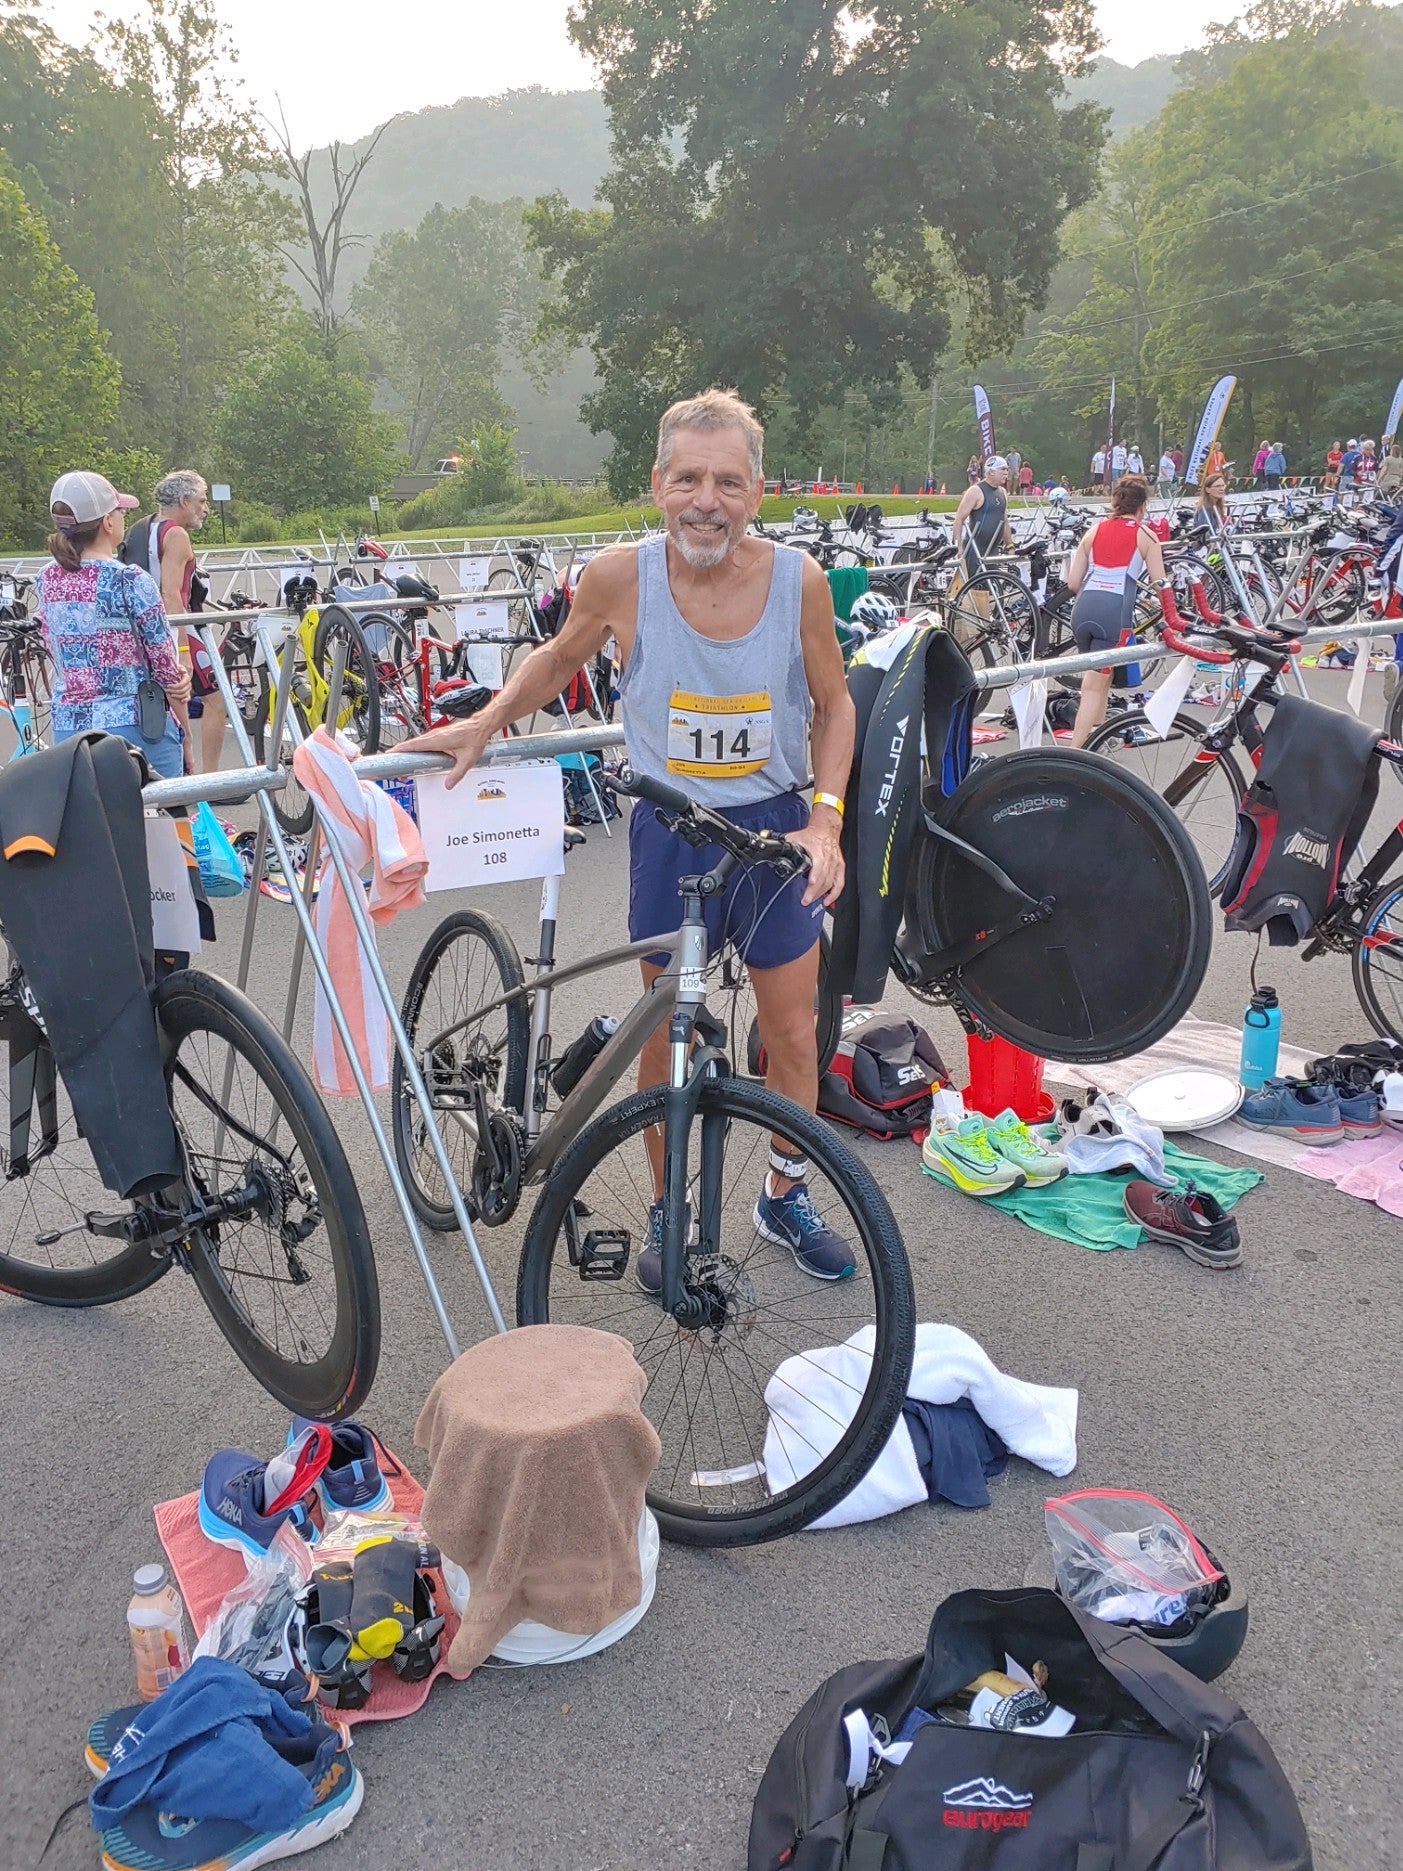 Unburdened By Limits, Joe Wins A Triathlon In His First Try